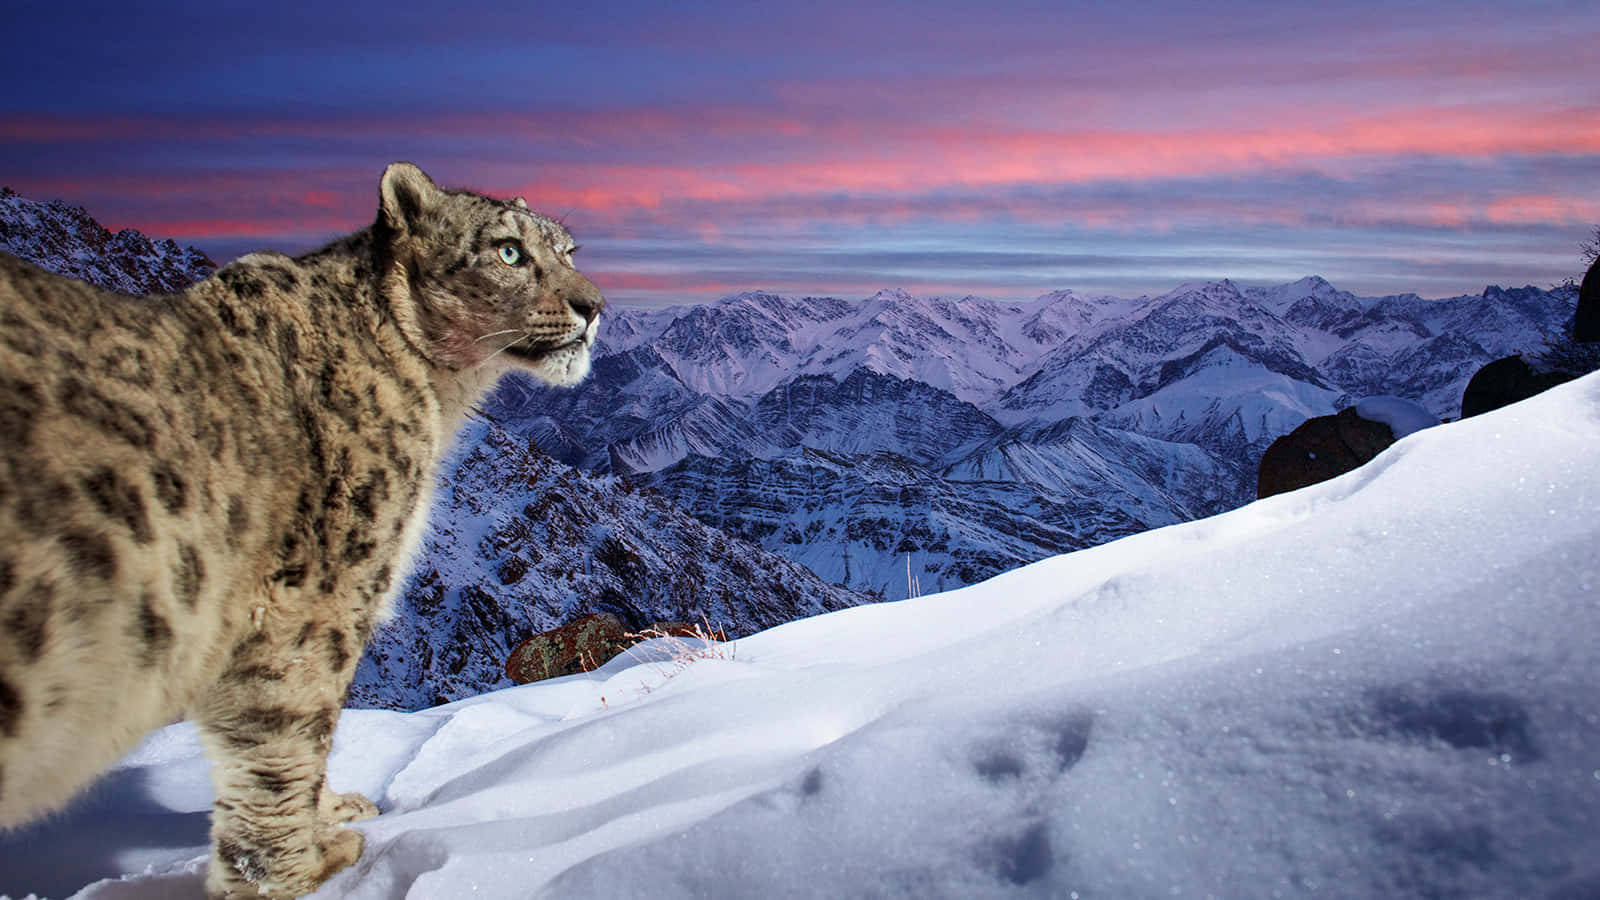 a snow leopard standing on top of a snowy mountain